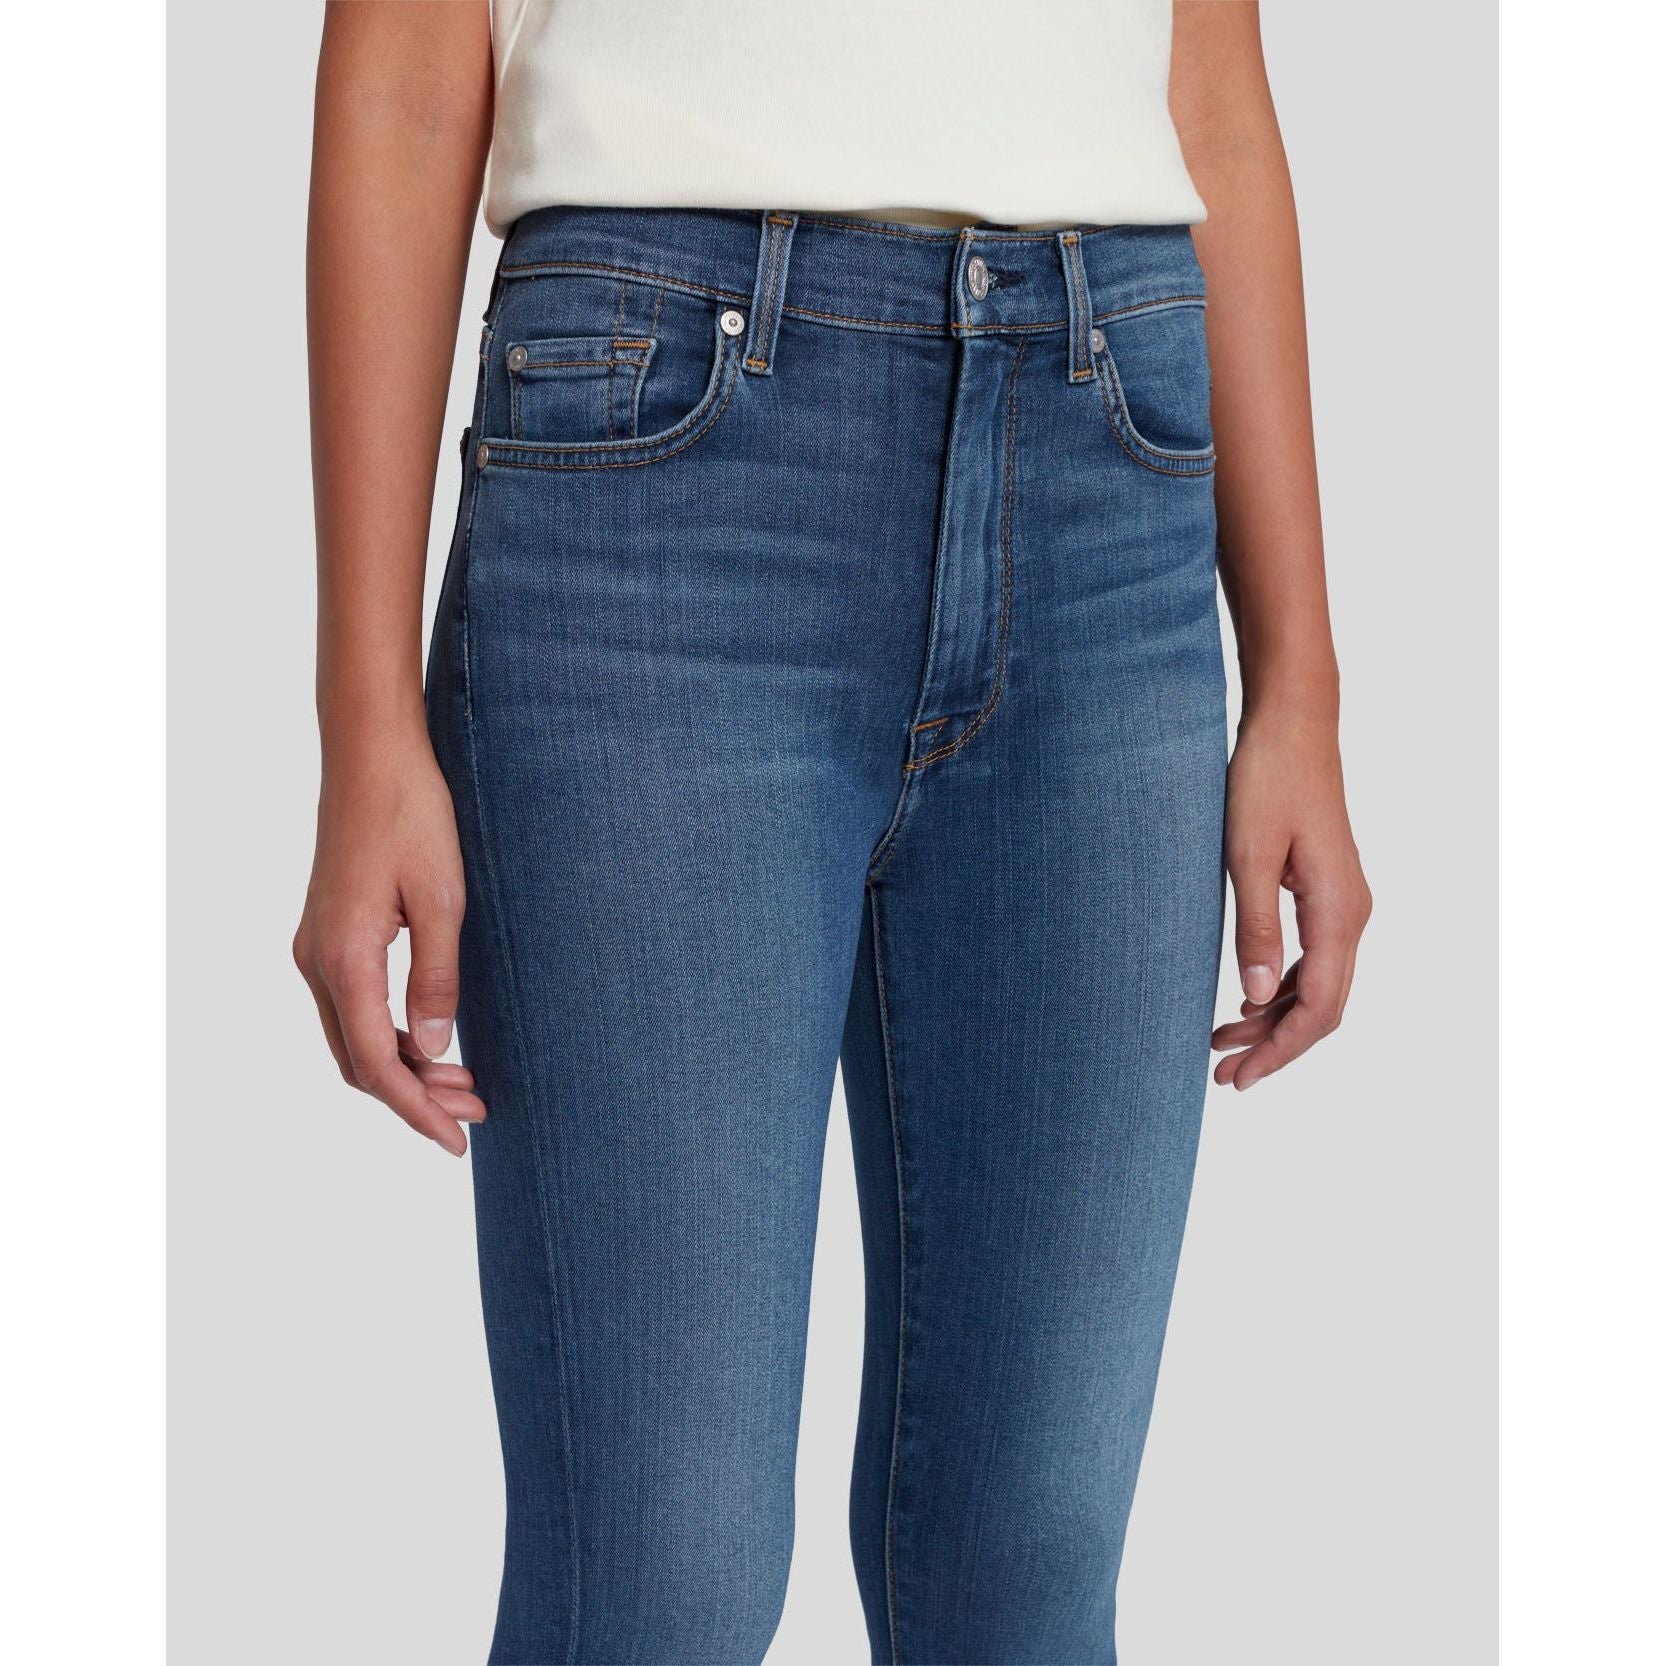 7 For All Mankind - High Rise Ankle Skinny in Love Story